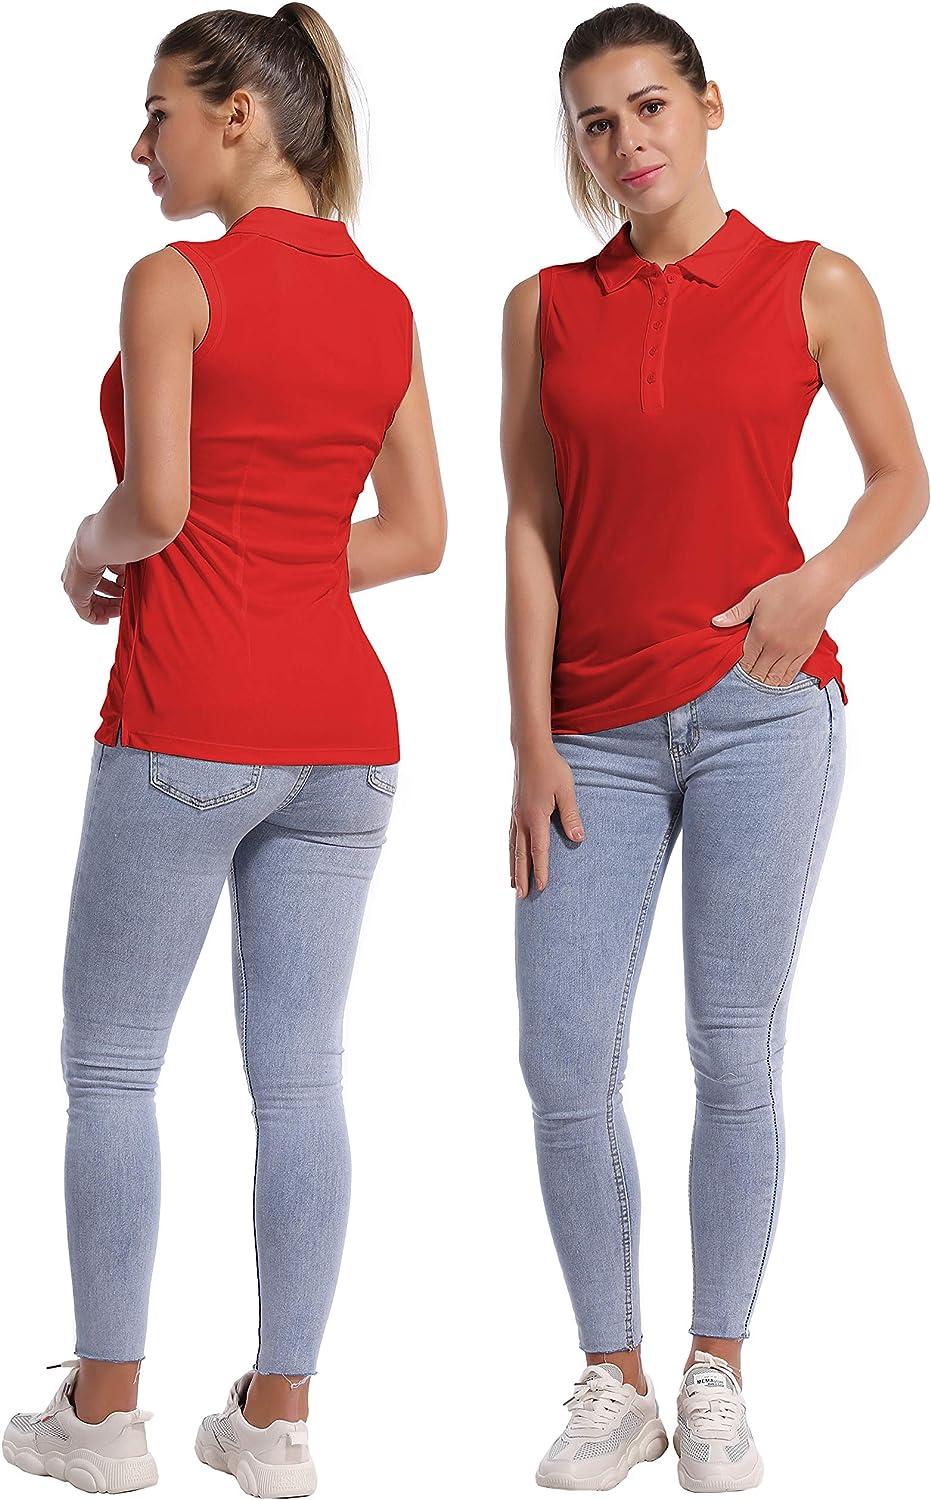 BUBBLELIME 3 Styles Sleeveless/Polo Women's UPF 50+ Sun Protection Tennis  Golf Athletic Shirts Quick Dry Outdoor Sports Small Polo Neck_red